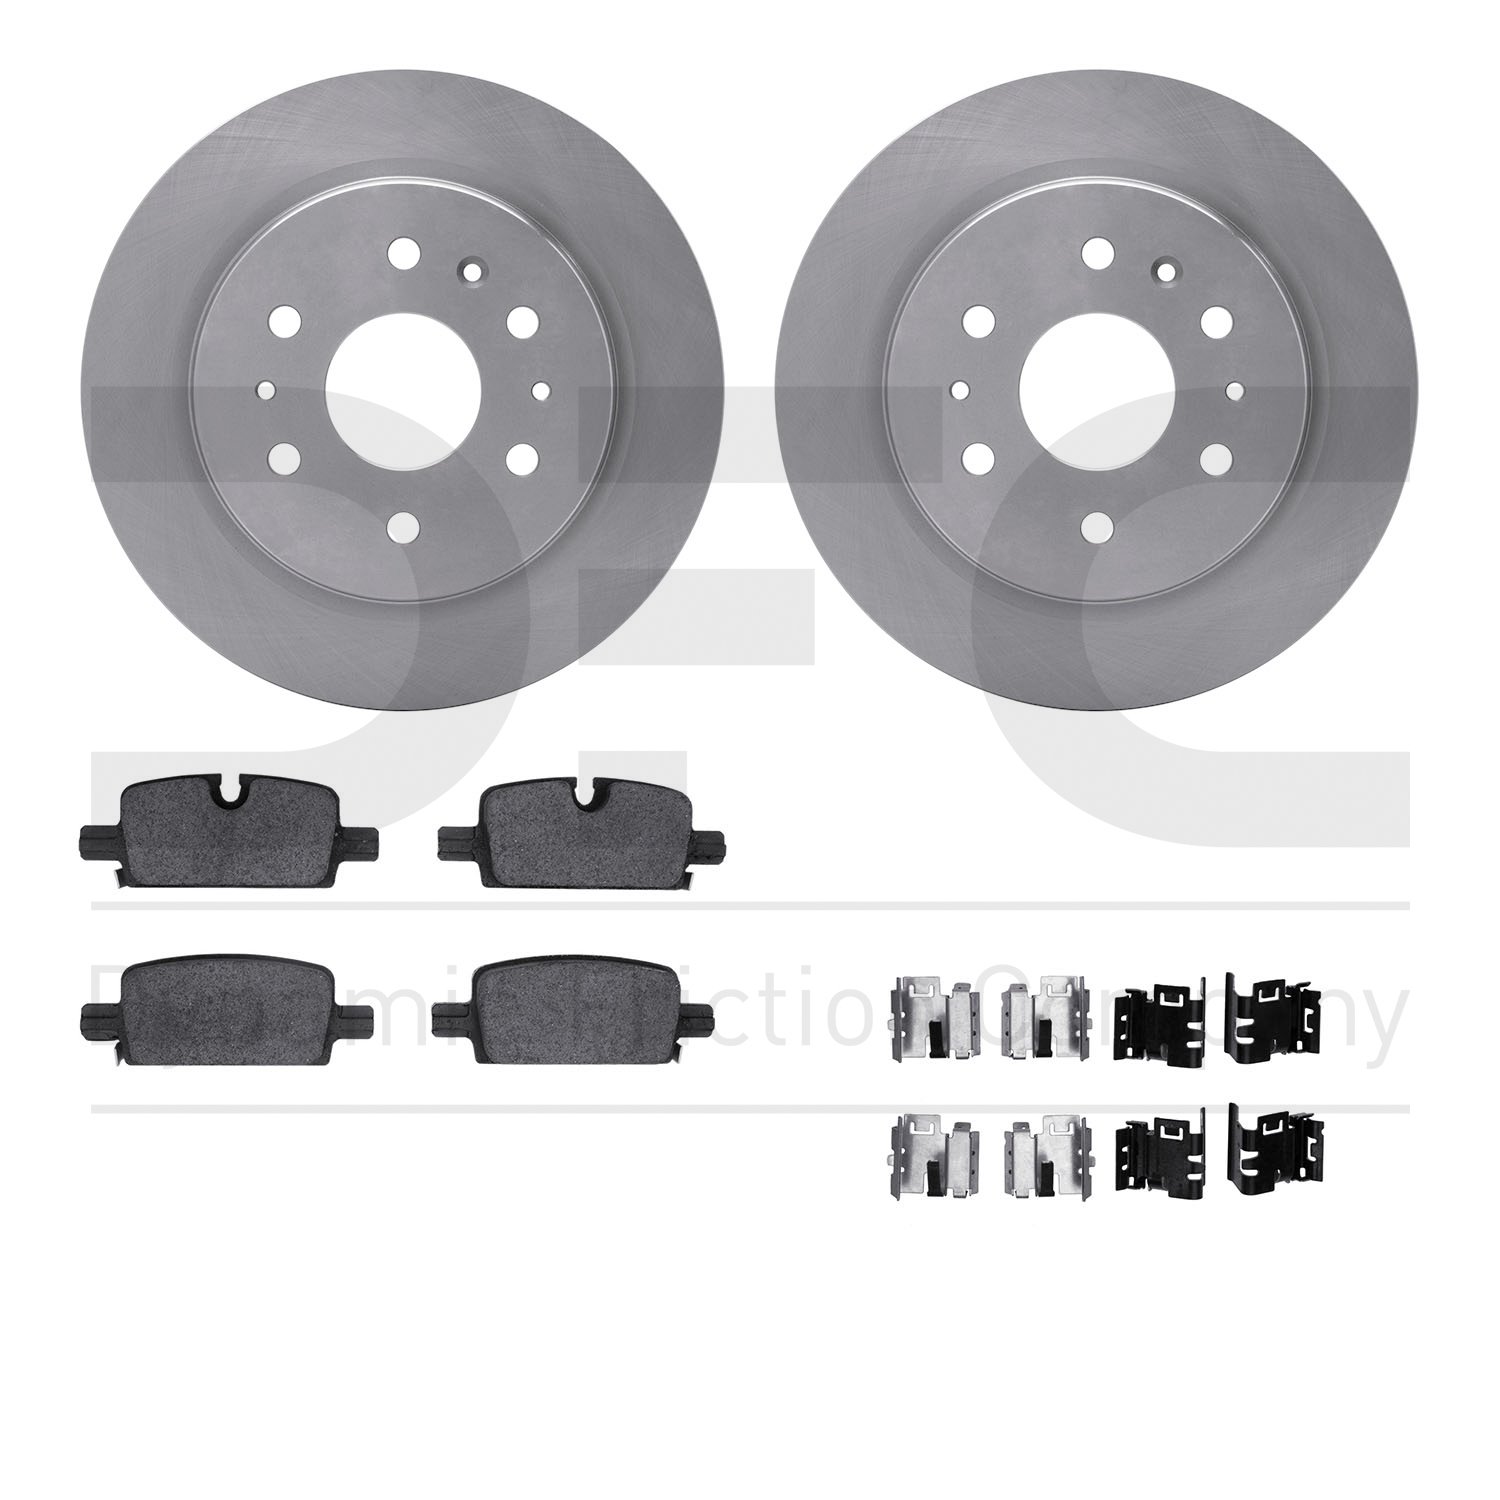 6412-47049 Brake Rotors with Ultimate-Duty Brake Pads Kit & Hardware, Fits Select GM, Position: Rear